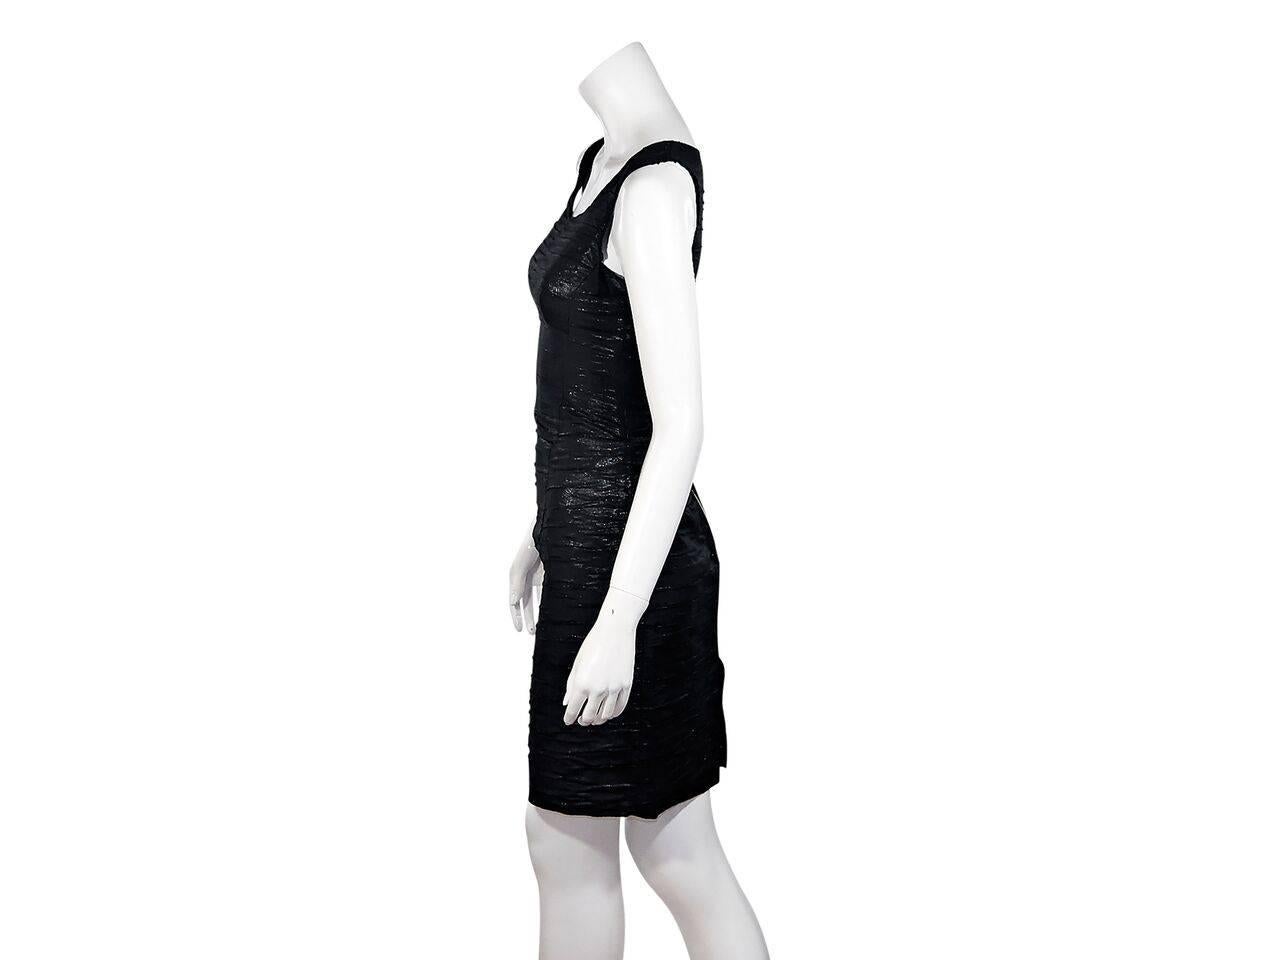 Product details:  Metallic black sheath dress by D&G.  Scoopneck.  Sleeveless.  Exposed back zip closure.  Center back hem slit.  Label size IT36.
Condition: Pre-owned. Very good.
Est. Retail $ 498.00